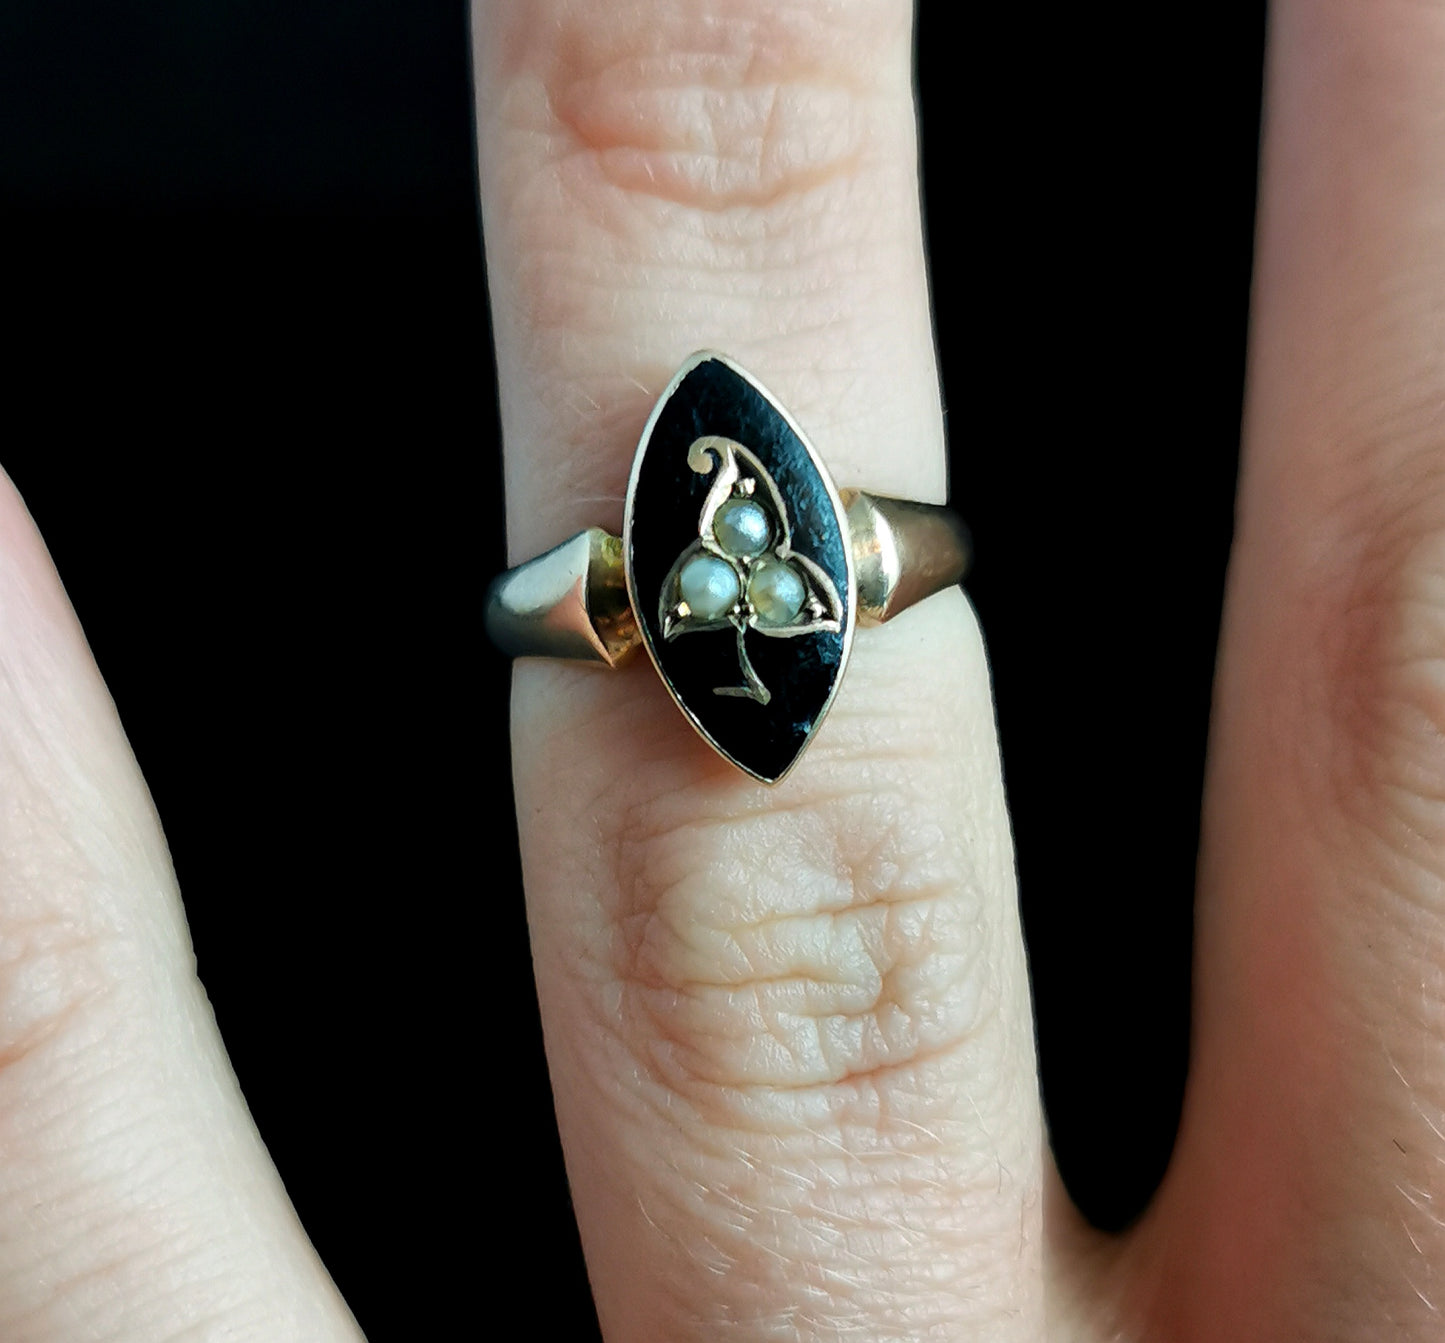 Antique Navette Mourning Ring, black enamel and pearl, Ivy leaf, 9ct yellow gold